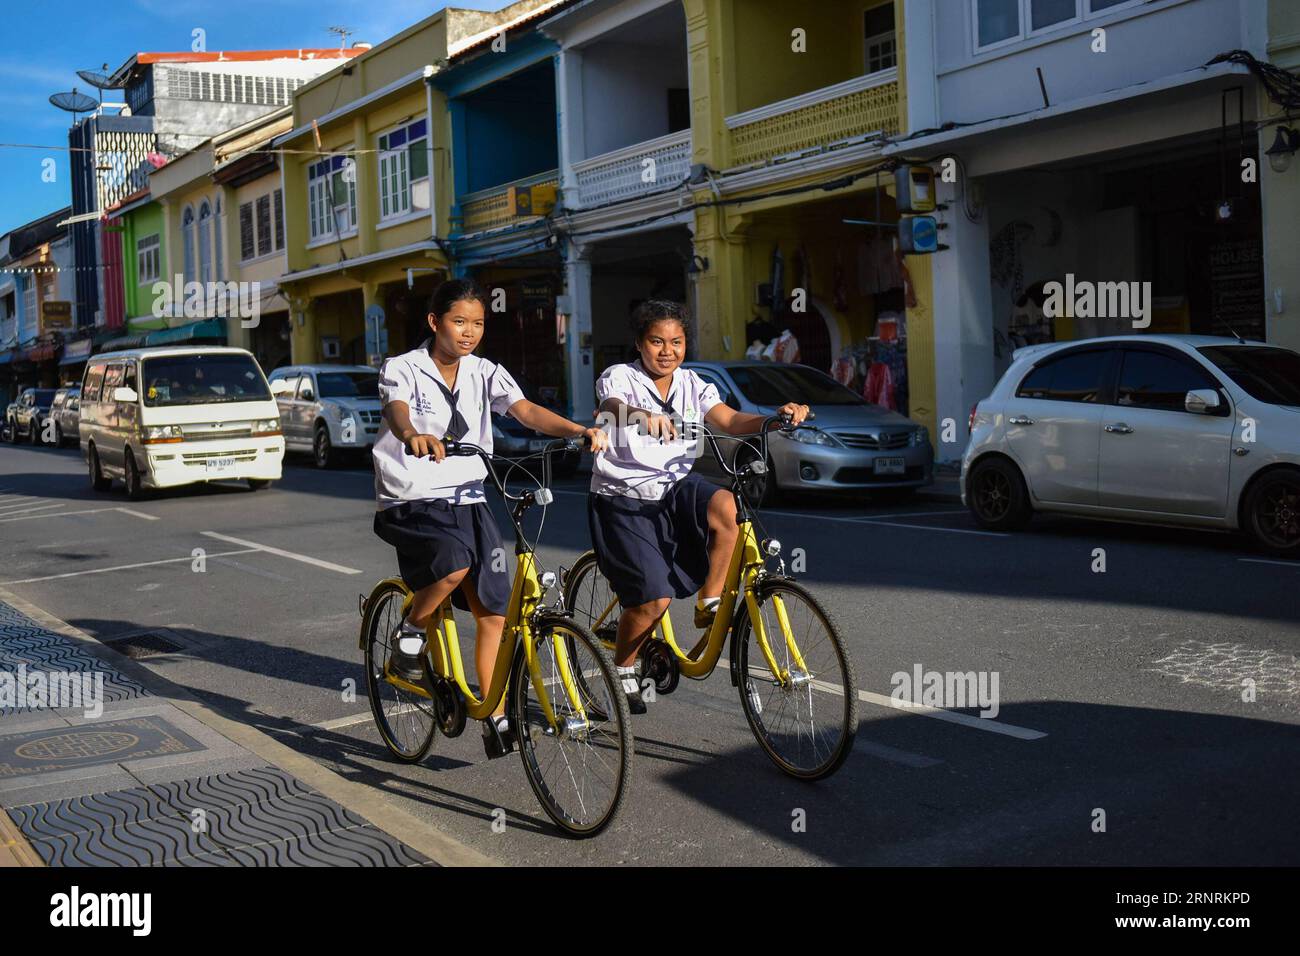 (171007) -- PHUKET, Oct. 7, 2017 -- Local students ride ofo sharing-bikes at a commercial area in Phuket, Thailand, Oct. 5, 2017. China s dock-less bike-sharing company ofo provided more than 1,000 bikes in Phuket s key locations in late September and offered a 1-month free trial without deposit fee. Now the bike-sharing service has benefited local residents and tourists. Ofo s regular service fee will be charged at 5 Baht per 30 minutes usage, with a deposit fee of 99 Baht. )(zhf) THAILAND-PHUKET-CHINA-BIKE-SHARING-OFO LixMangmang PUBLICATIONxNOTxINxCHN Stock Photo